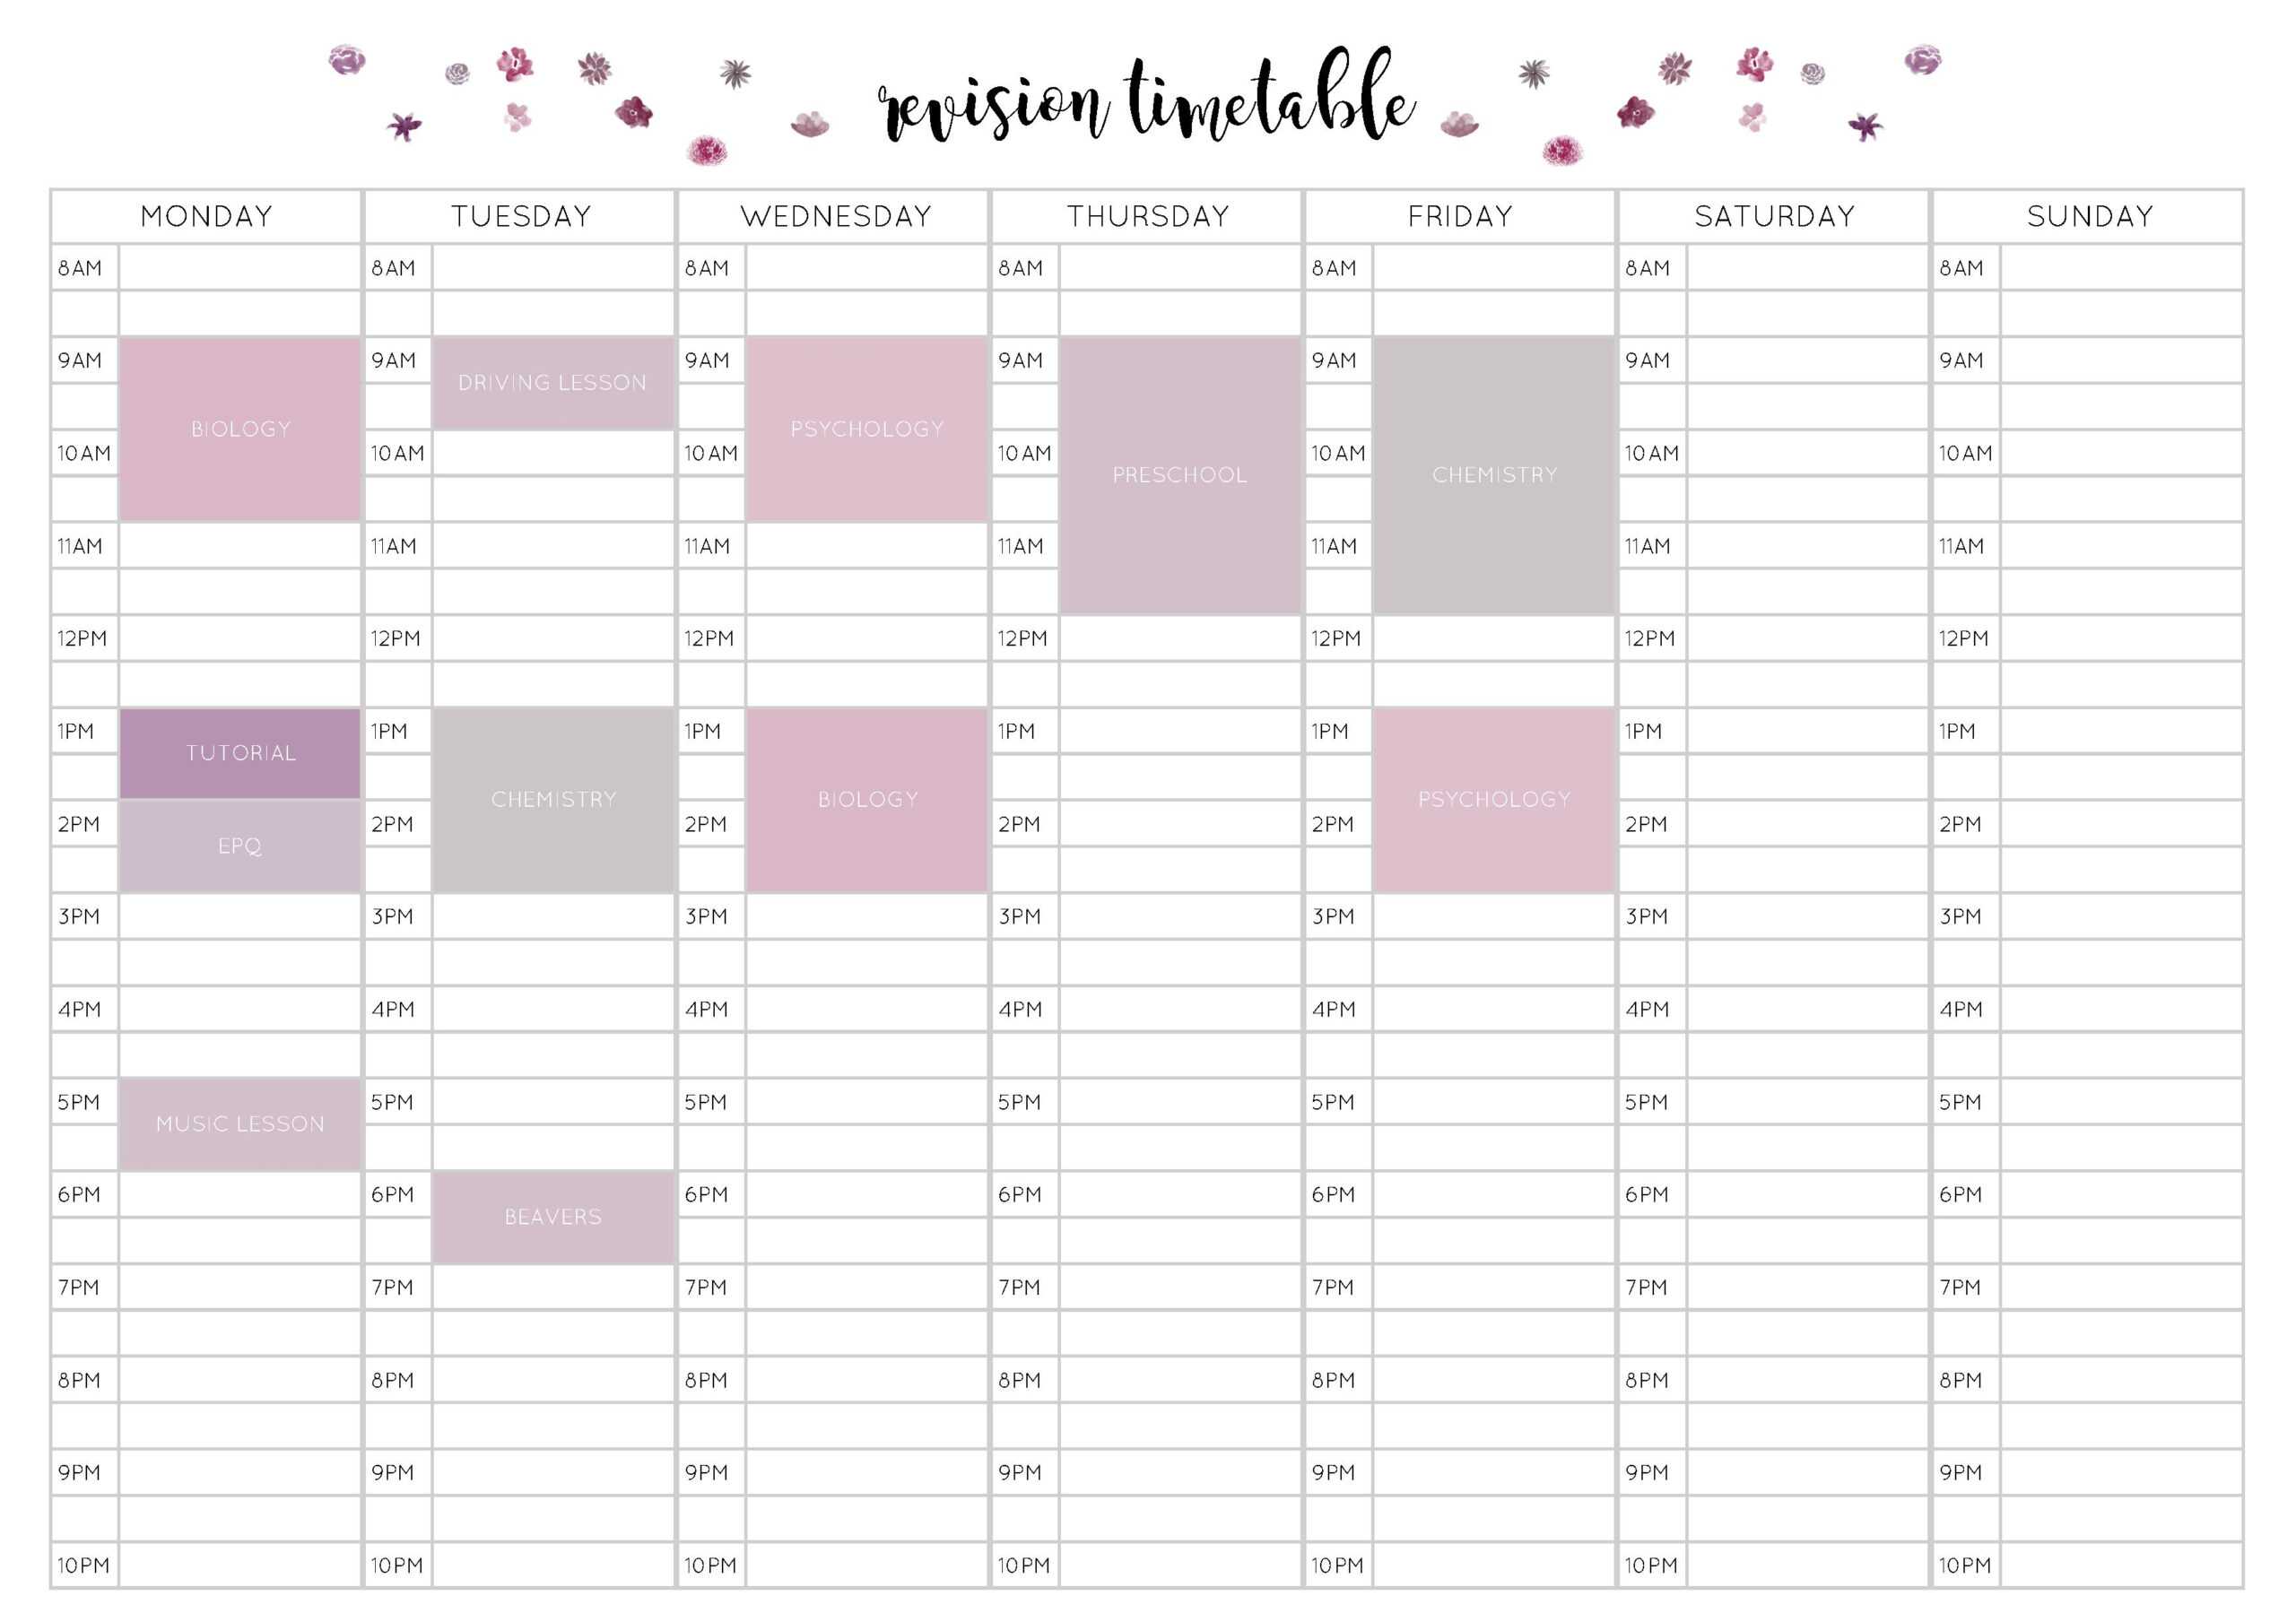 Free Revision Timetable Printable – Emily Studies Pertaining To Blank Revision Timetable Template